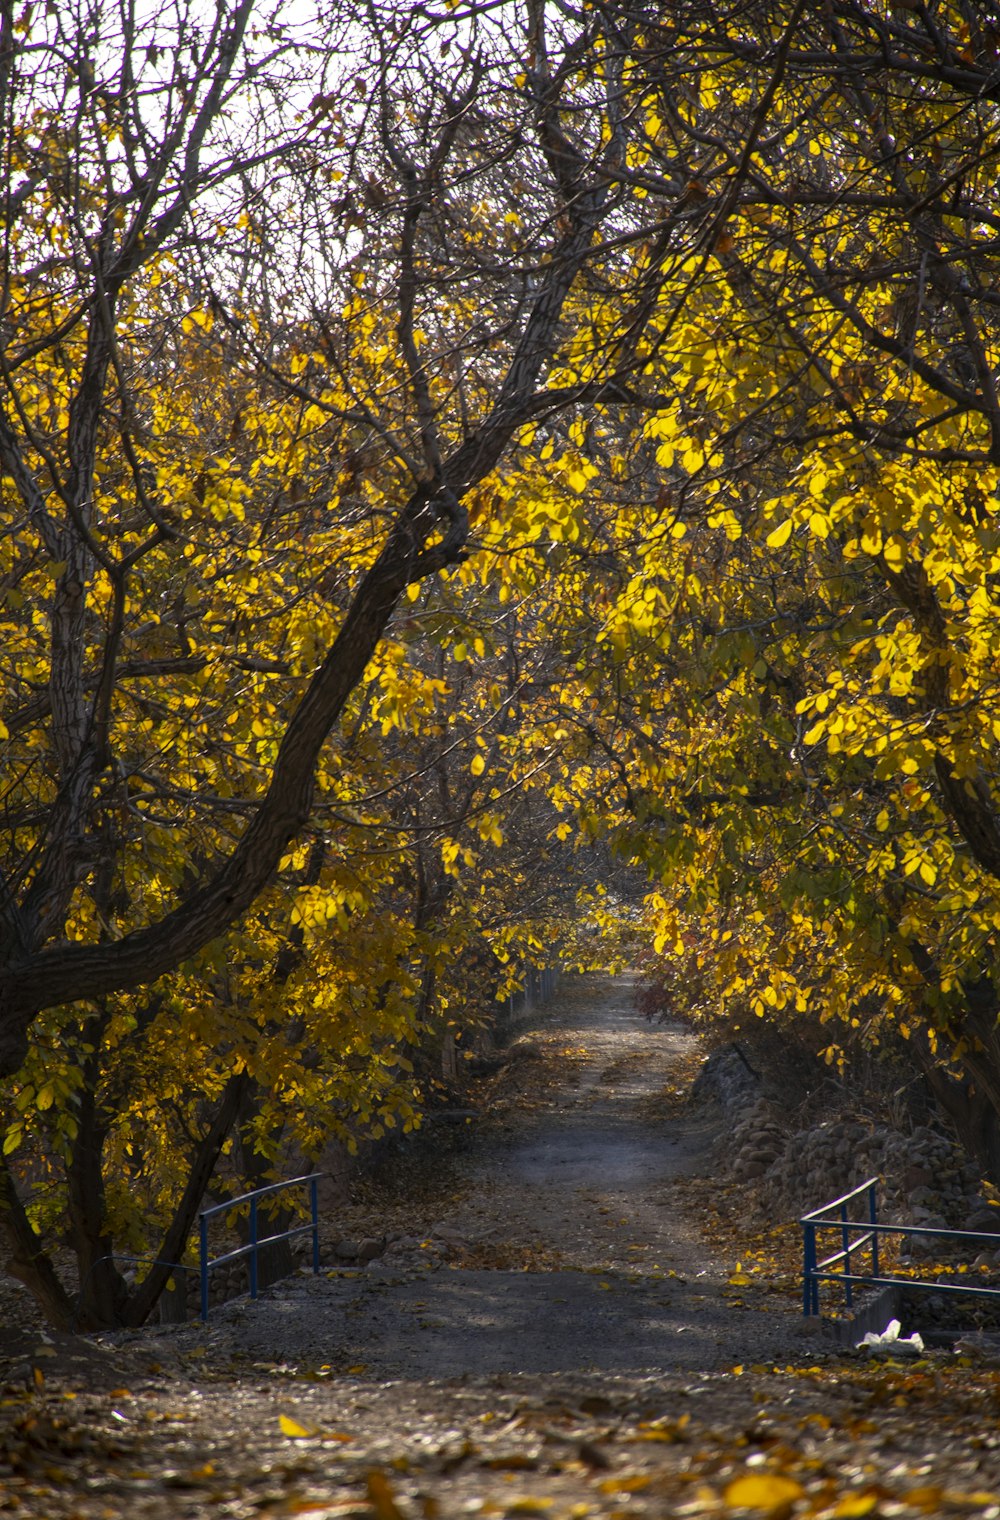 a path with yellow leaves on the ground and trees on either side